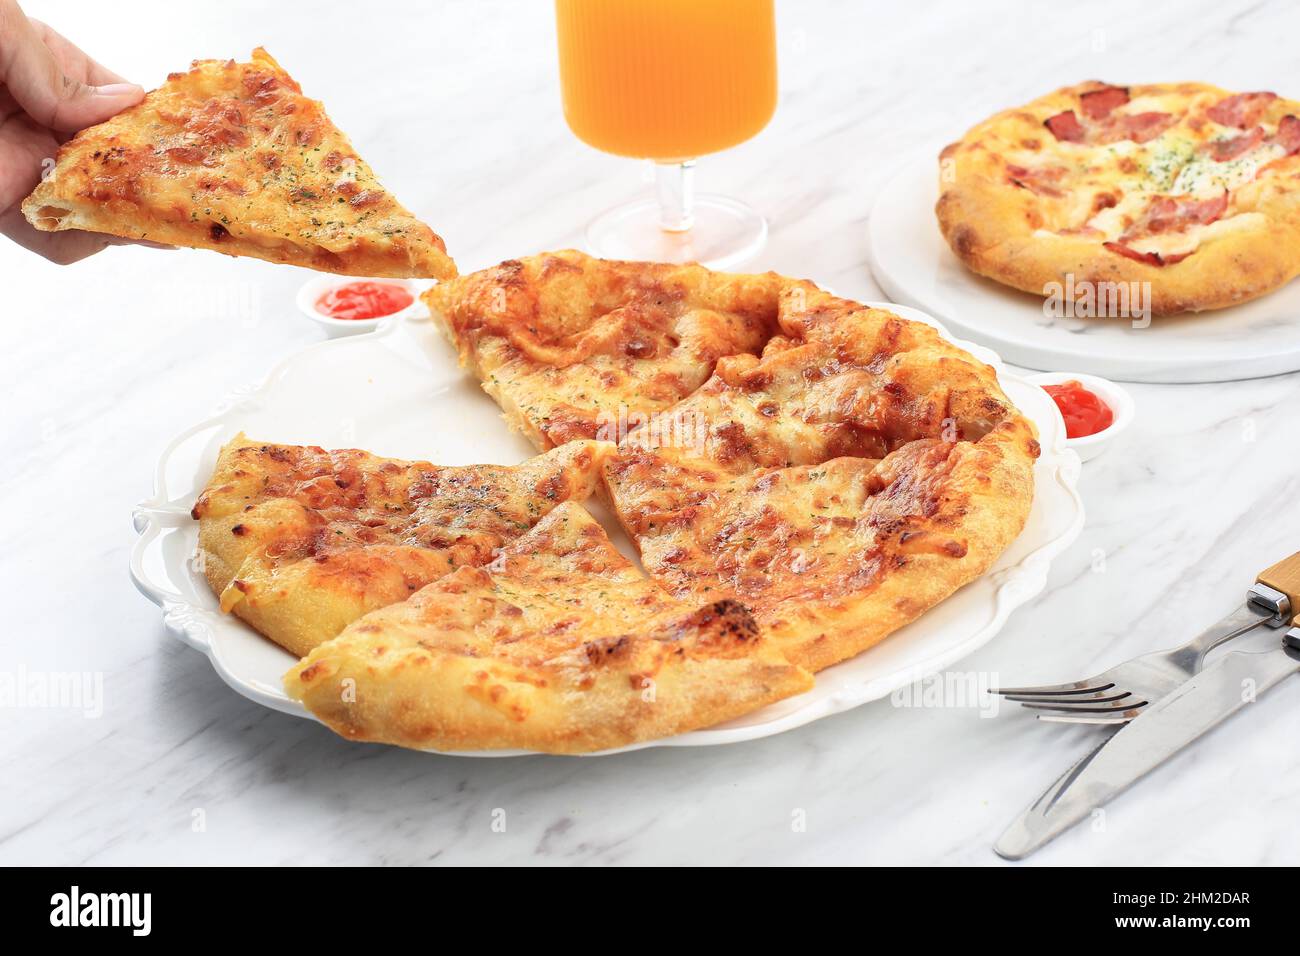 Pizza with Melted Cheese on Top, A Girl Take on Slice Pizza. Served on White Plate, Concept White Pizzeria. Selected Focus Stock Photo